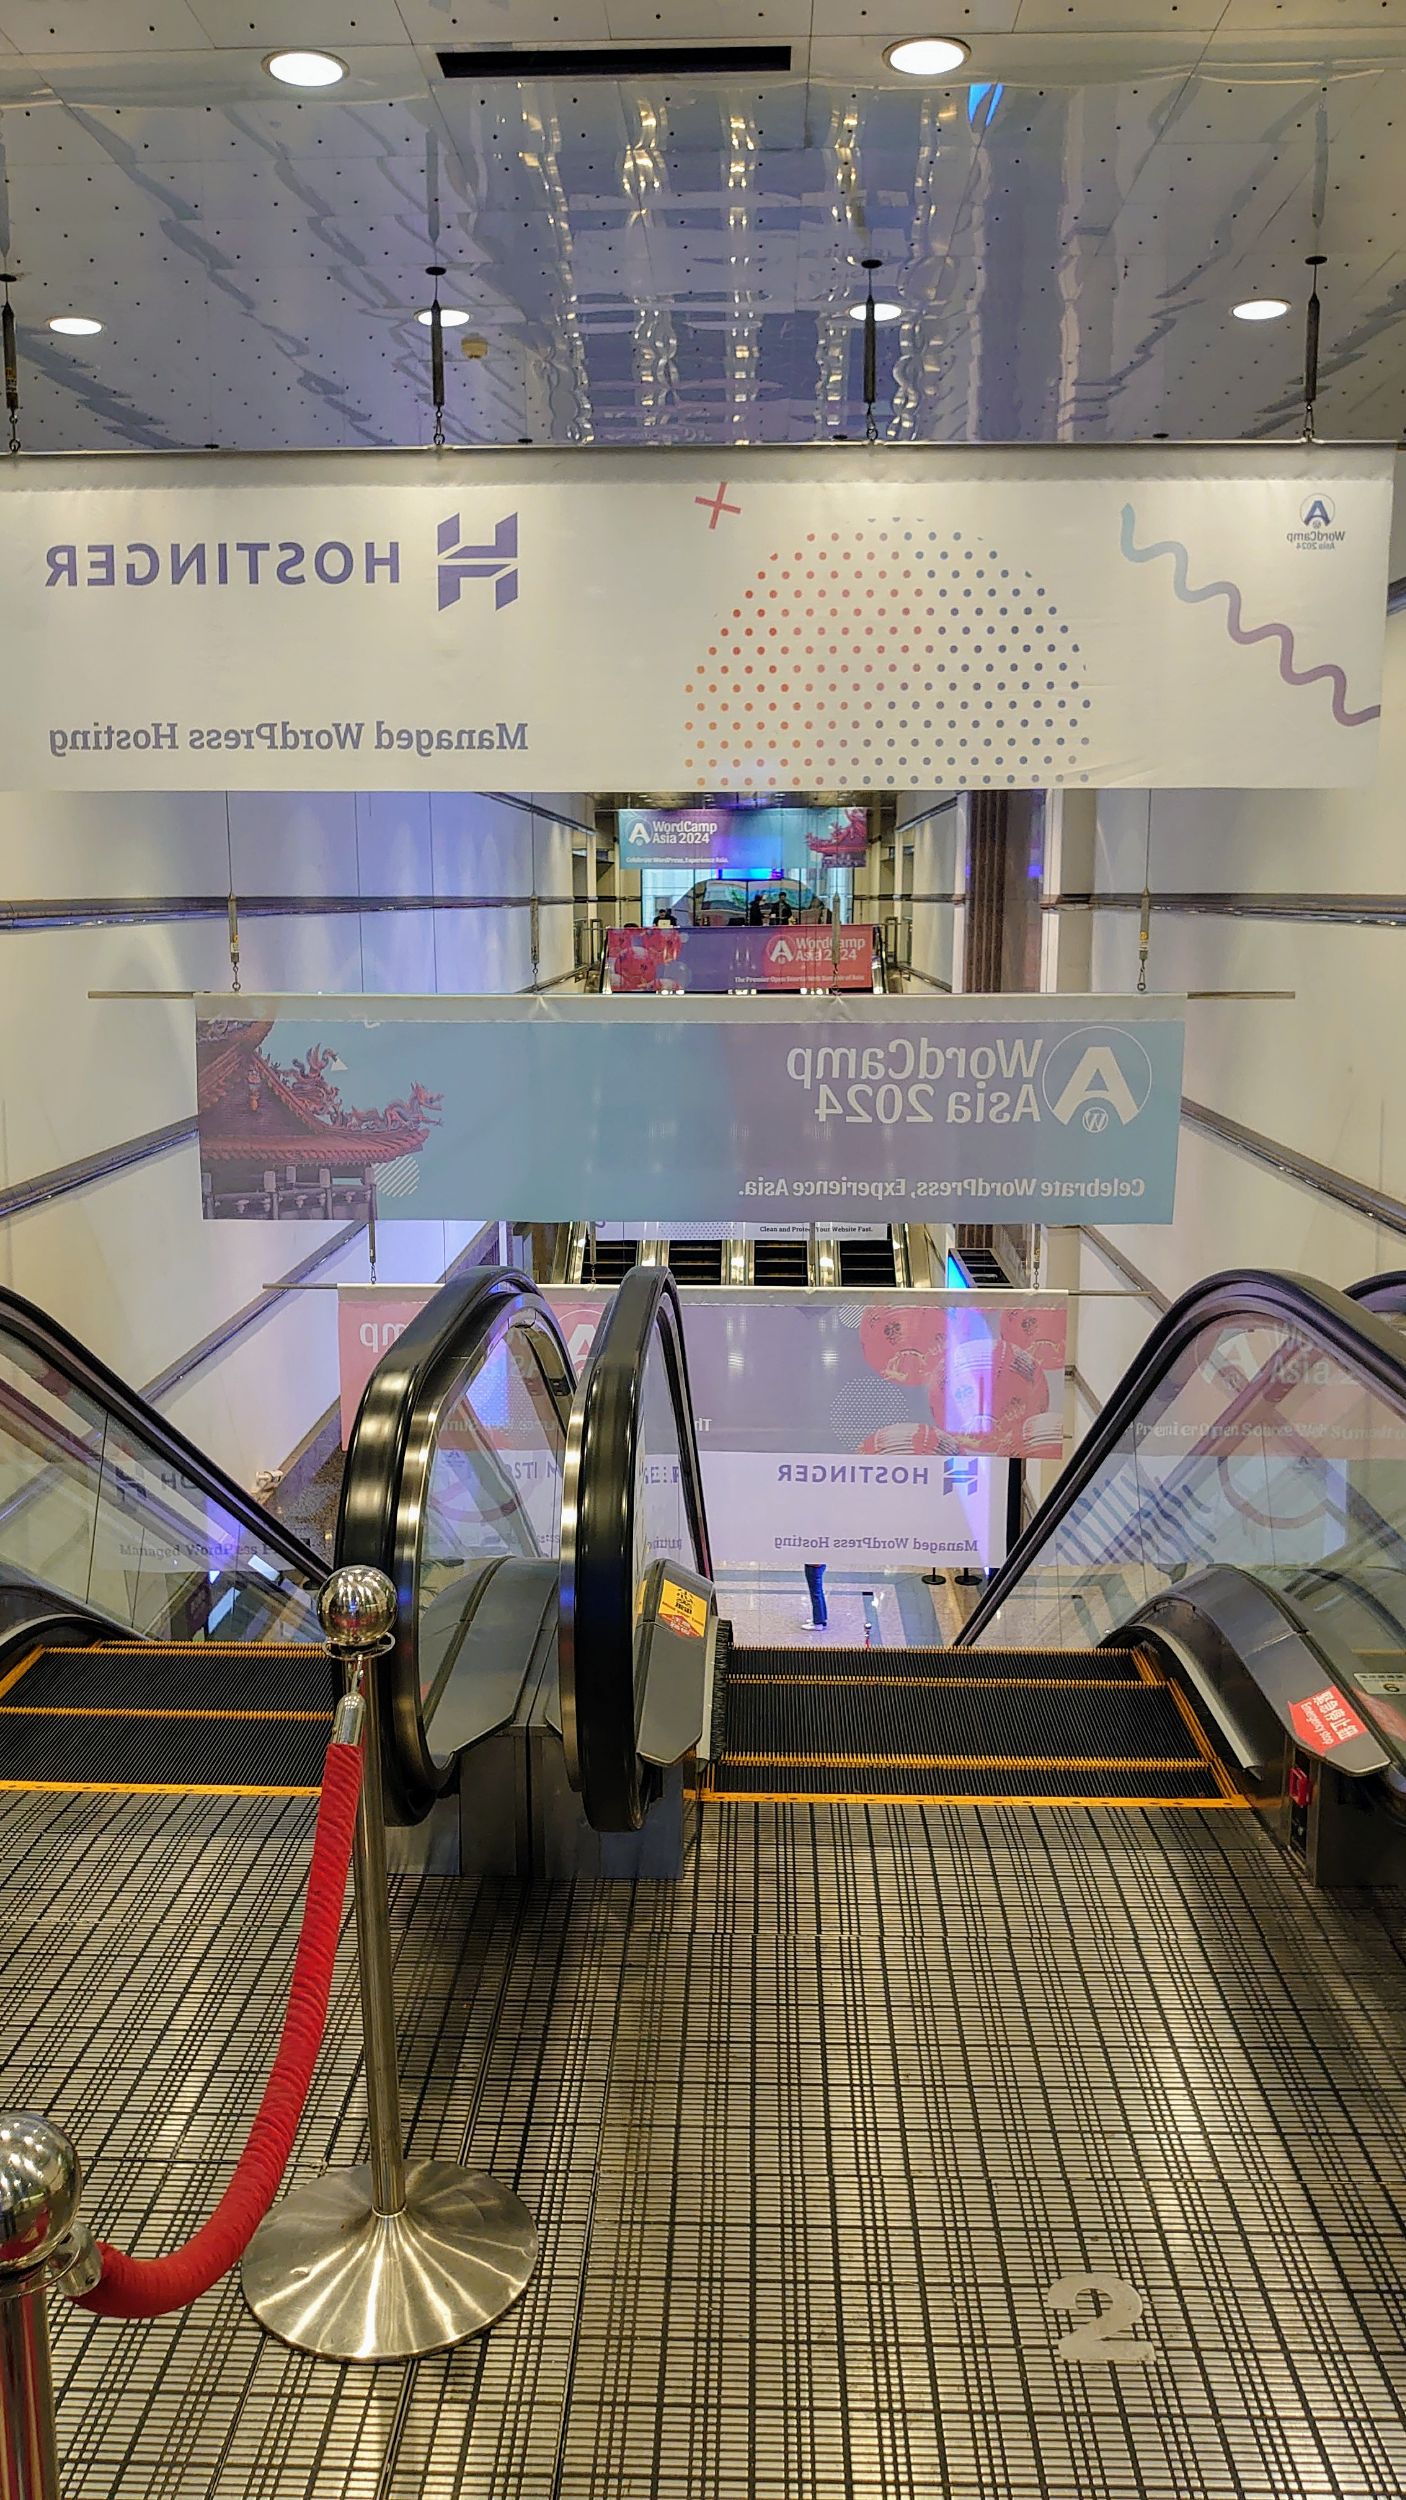 Hanning banners on escalators - The see-through effect viewed from 2F